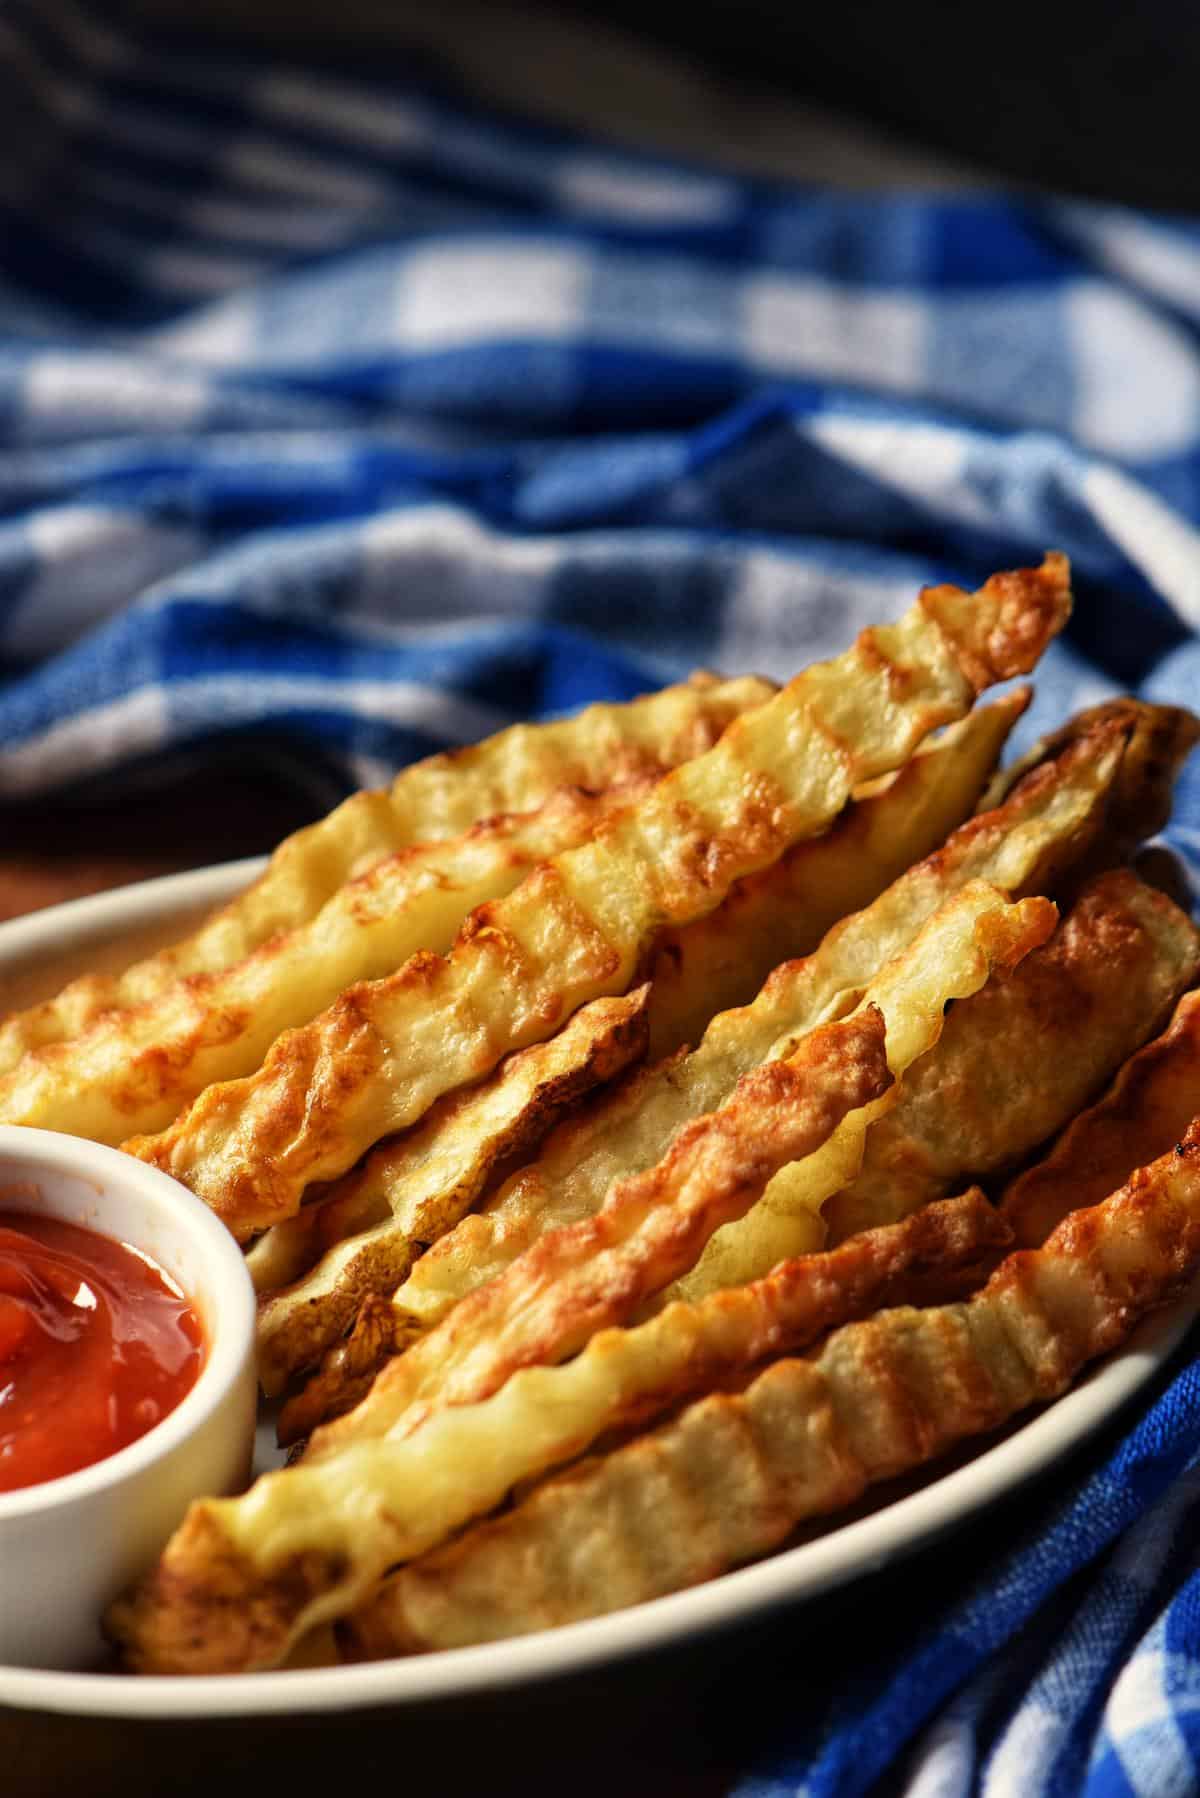 A small plate of crinkle-cut fries.